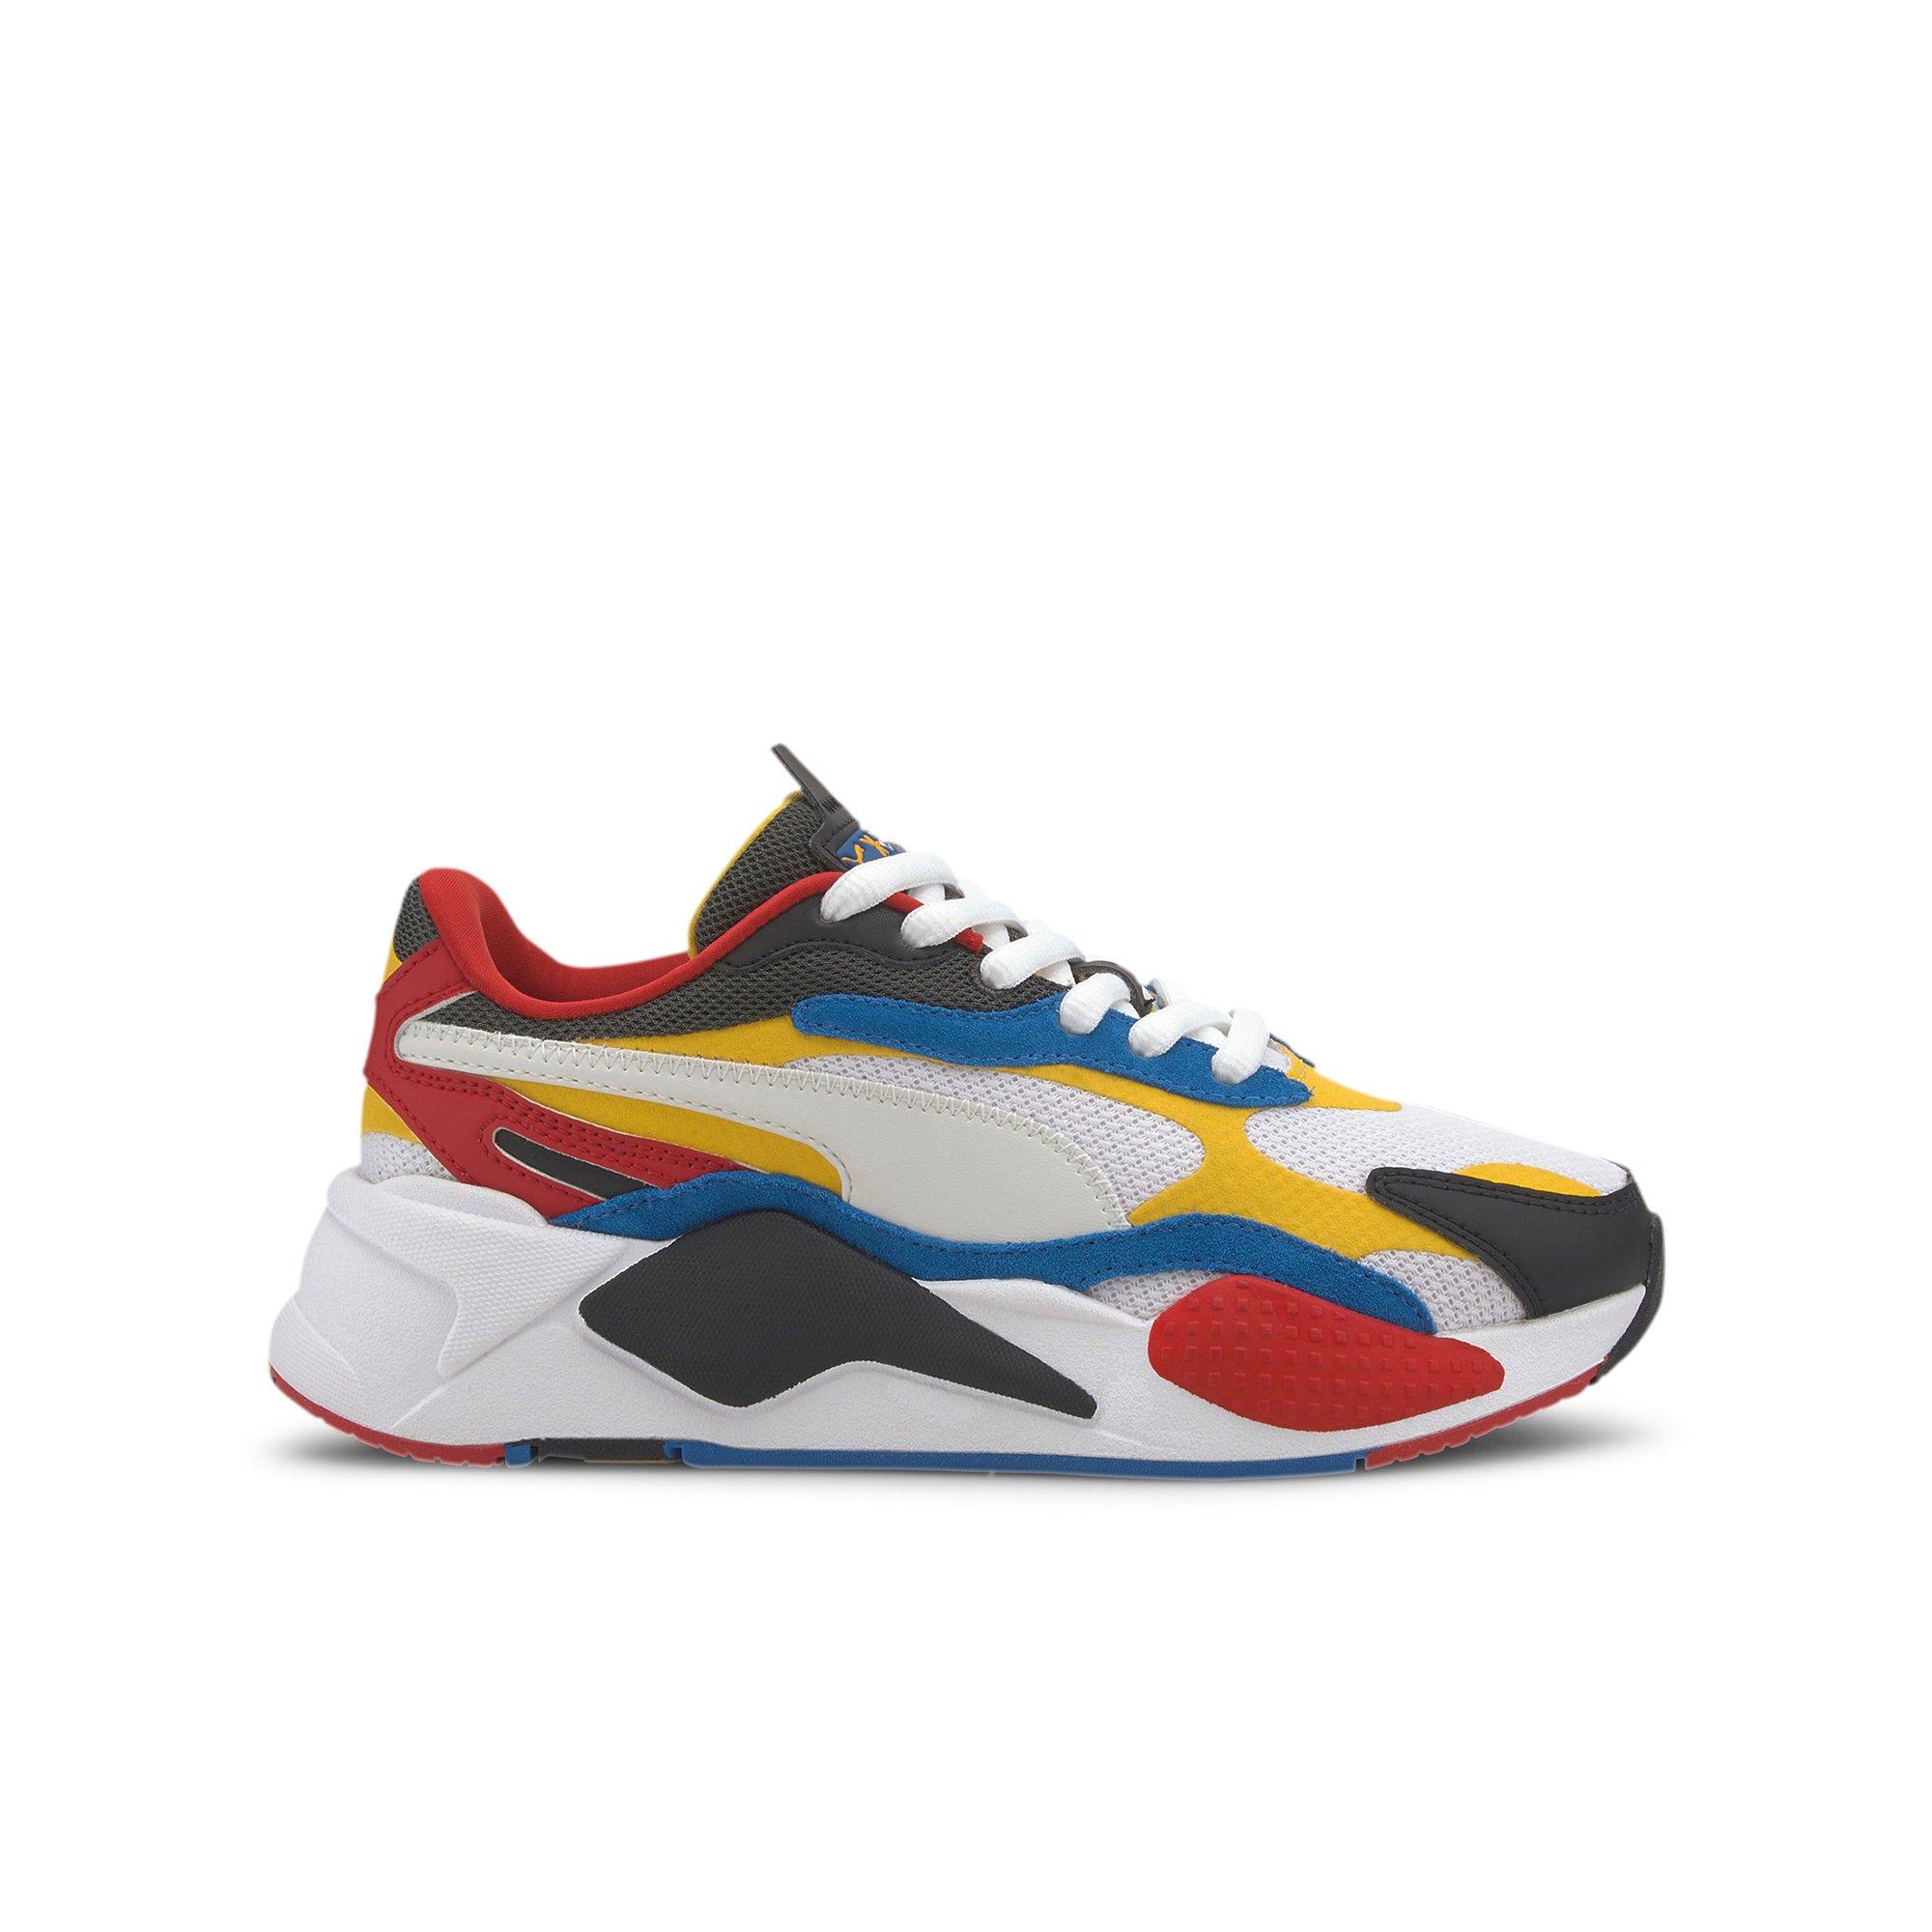 puma blue and yellow shoes